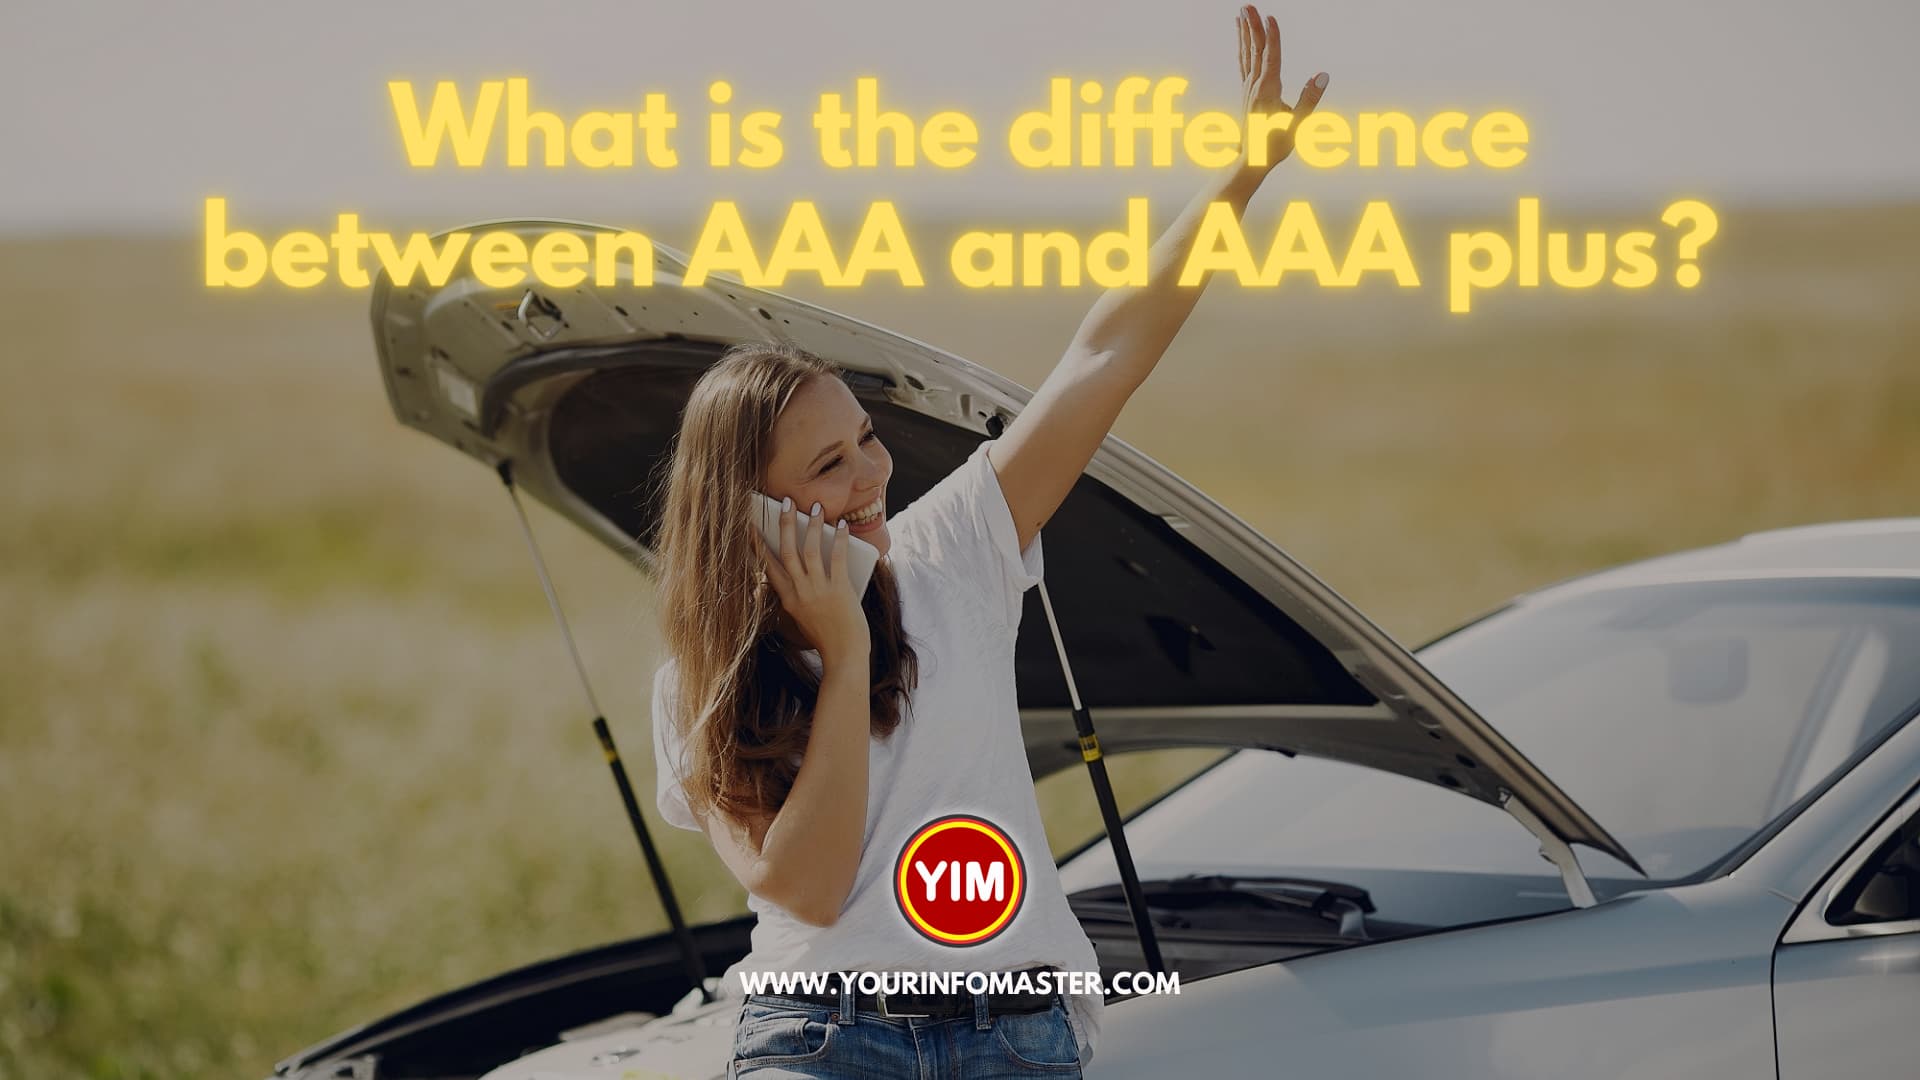 What is the difference between AAA and AAA plus